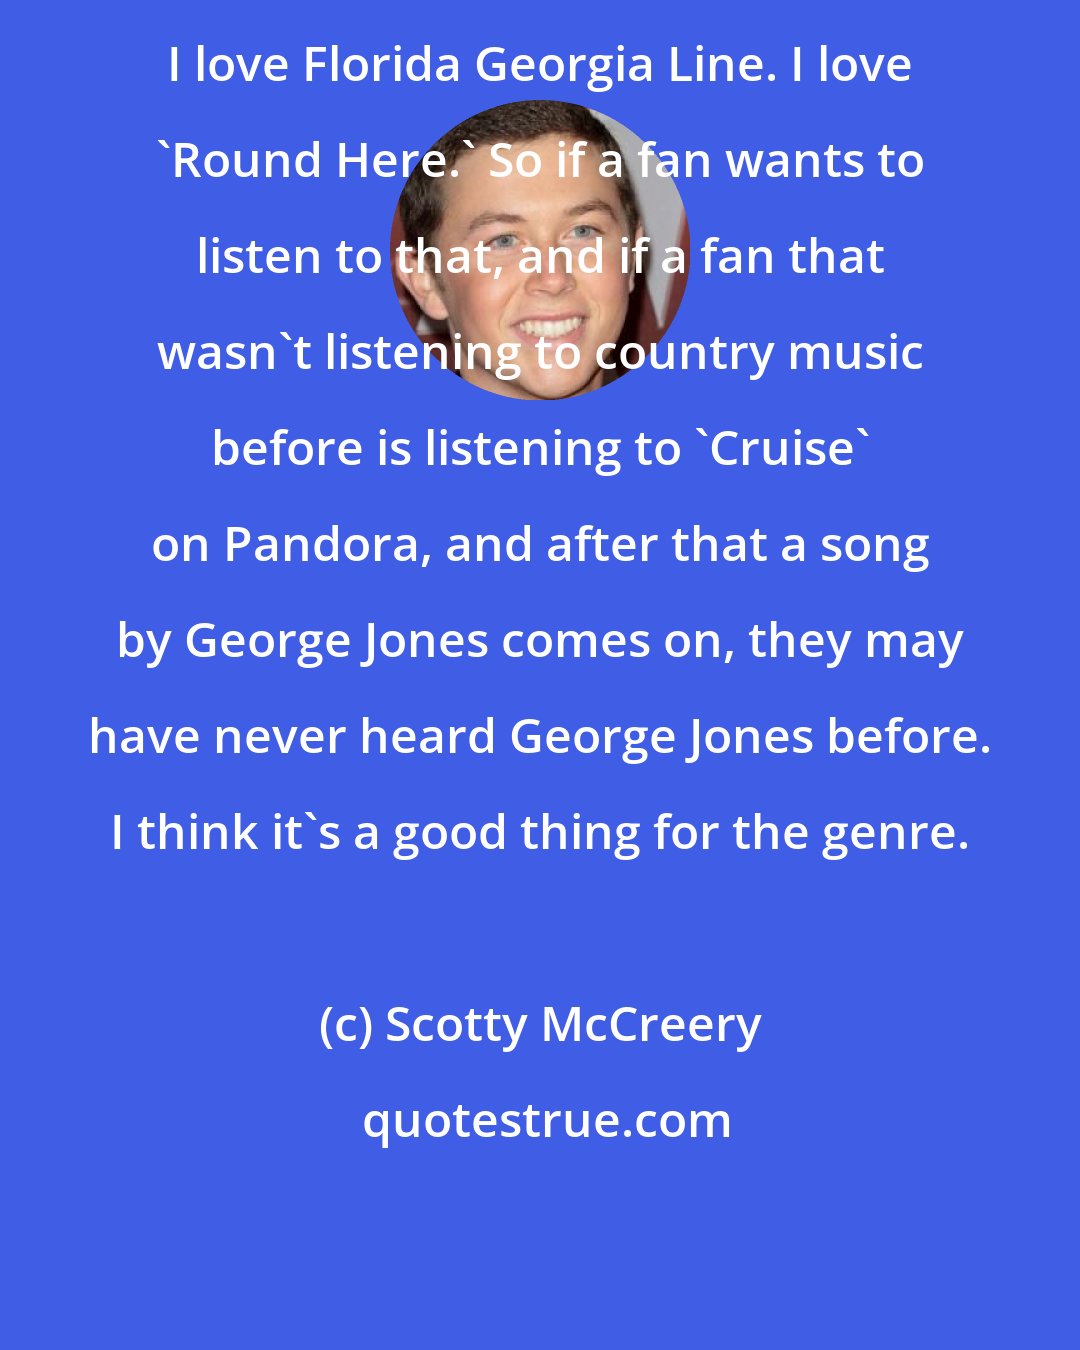 Scotty McCreery: I love Florida Georgia Line. I love 'Round Here.' So if a fan wants to listen to that, and if a fan that wasn't listening to country music before is listening to 'Cruise' on Pandora, and after that a song by George Jones comes on, they may have never heard George Jones before. I think it's a good thing for the genre.